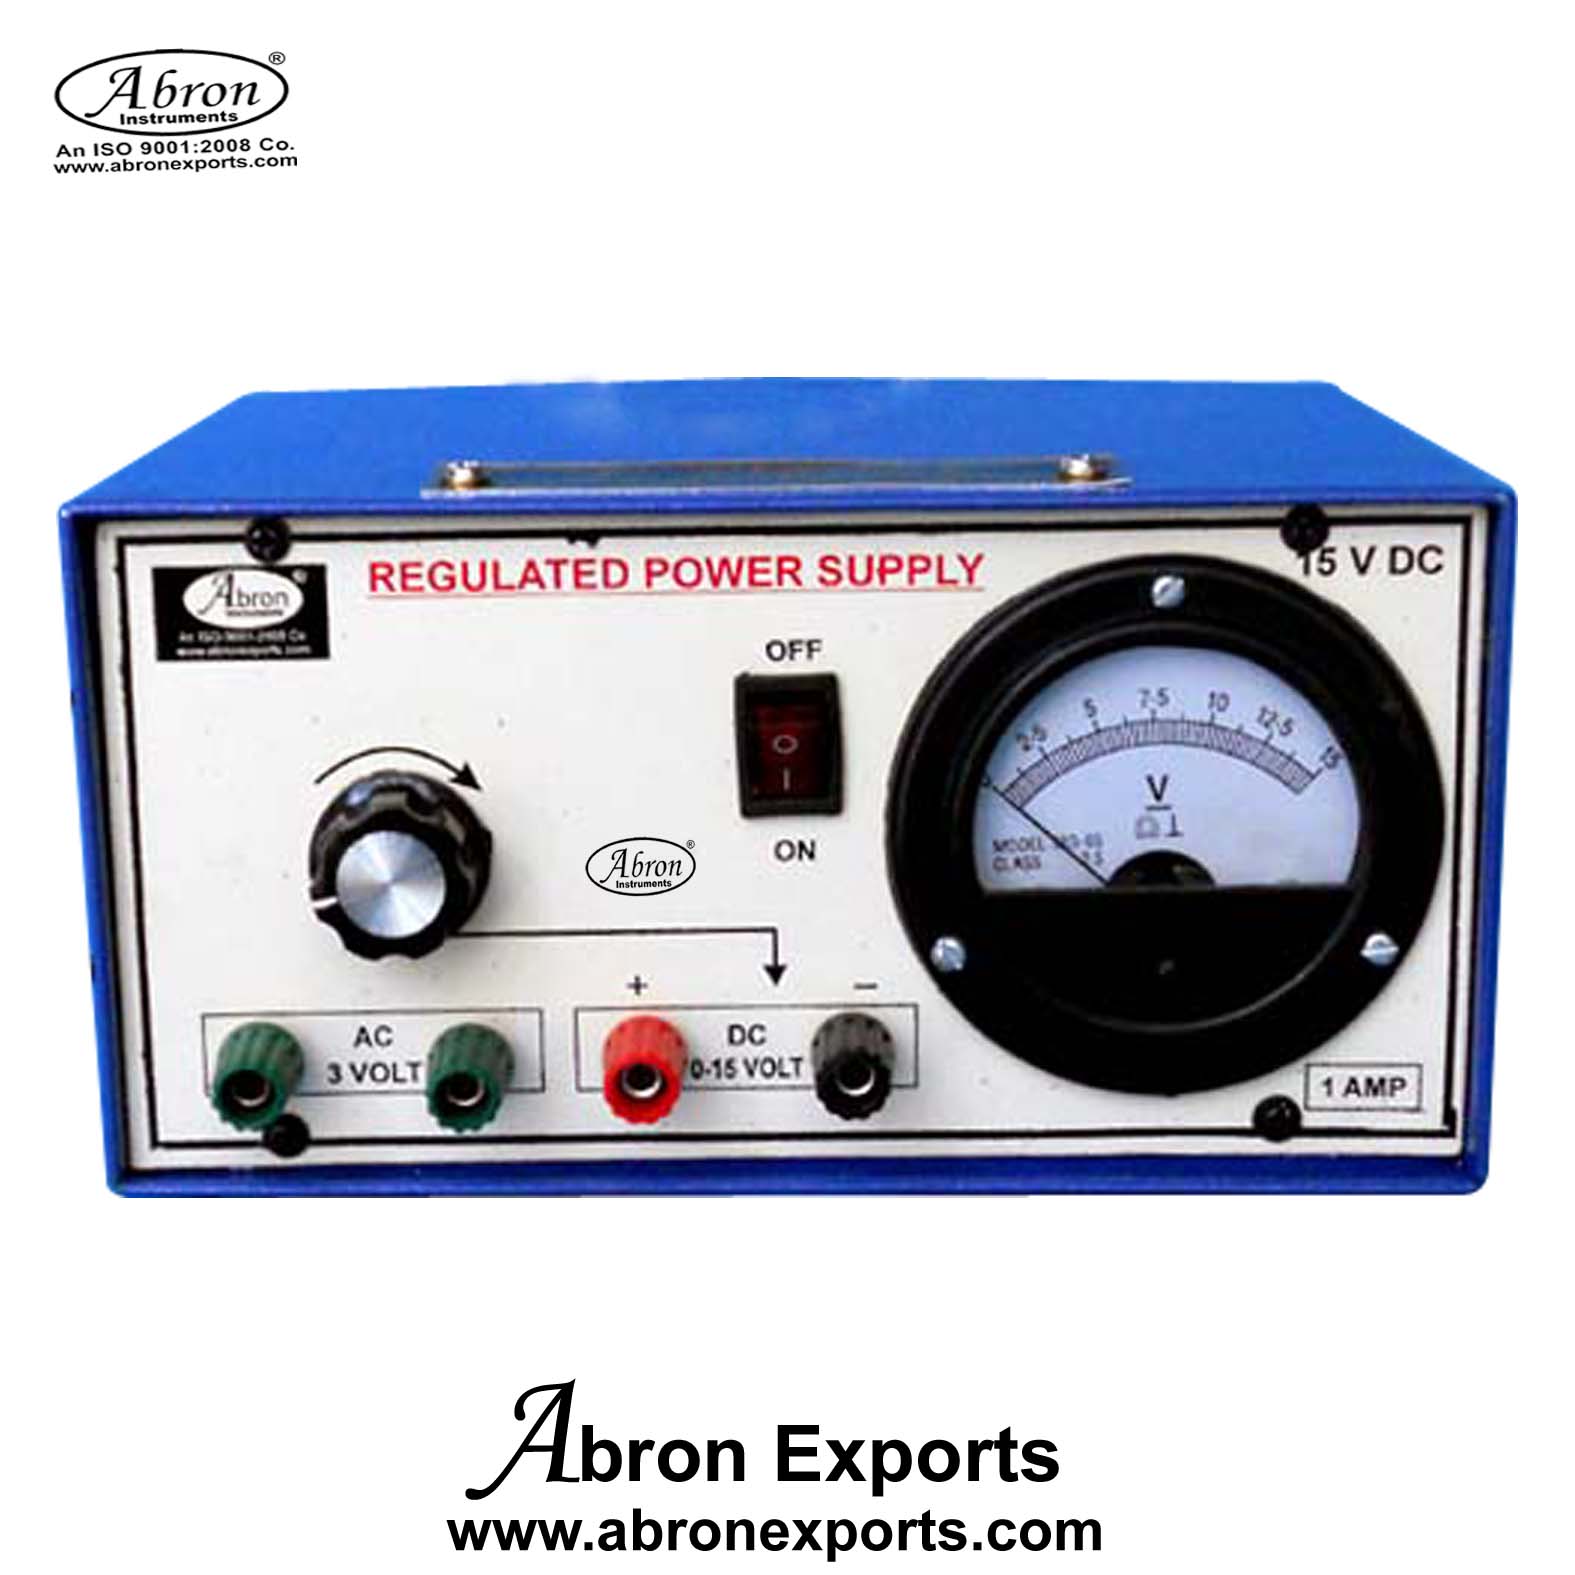 Battery Eliminator Dual Output 0-24VDC AC3V 1 Amp With Banana Terminals Out Input 220v with wire AE-1205D24 